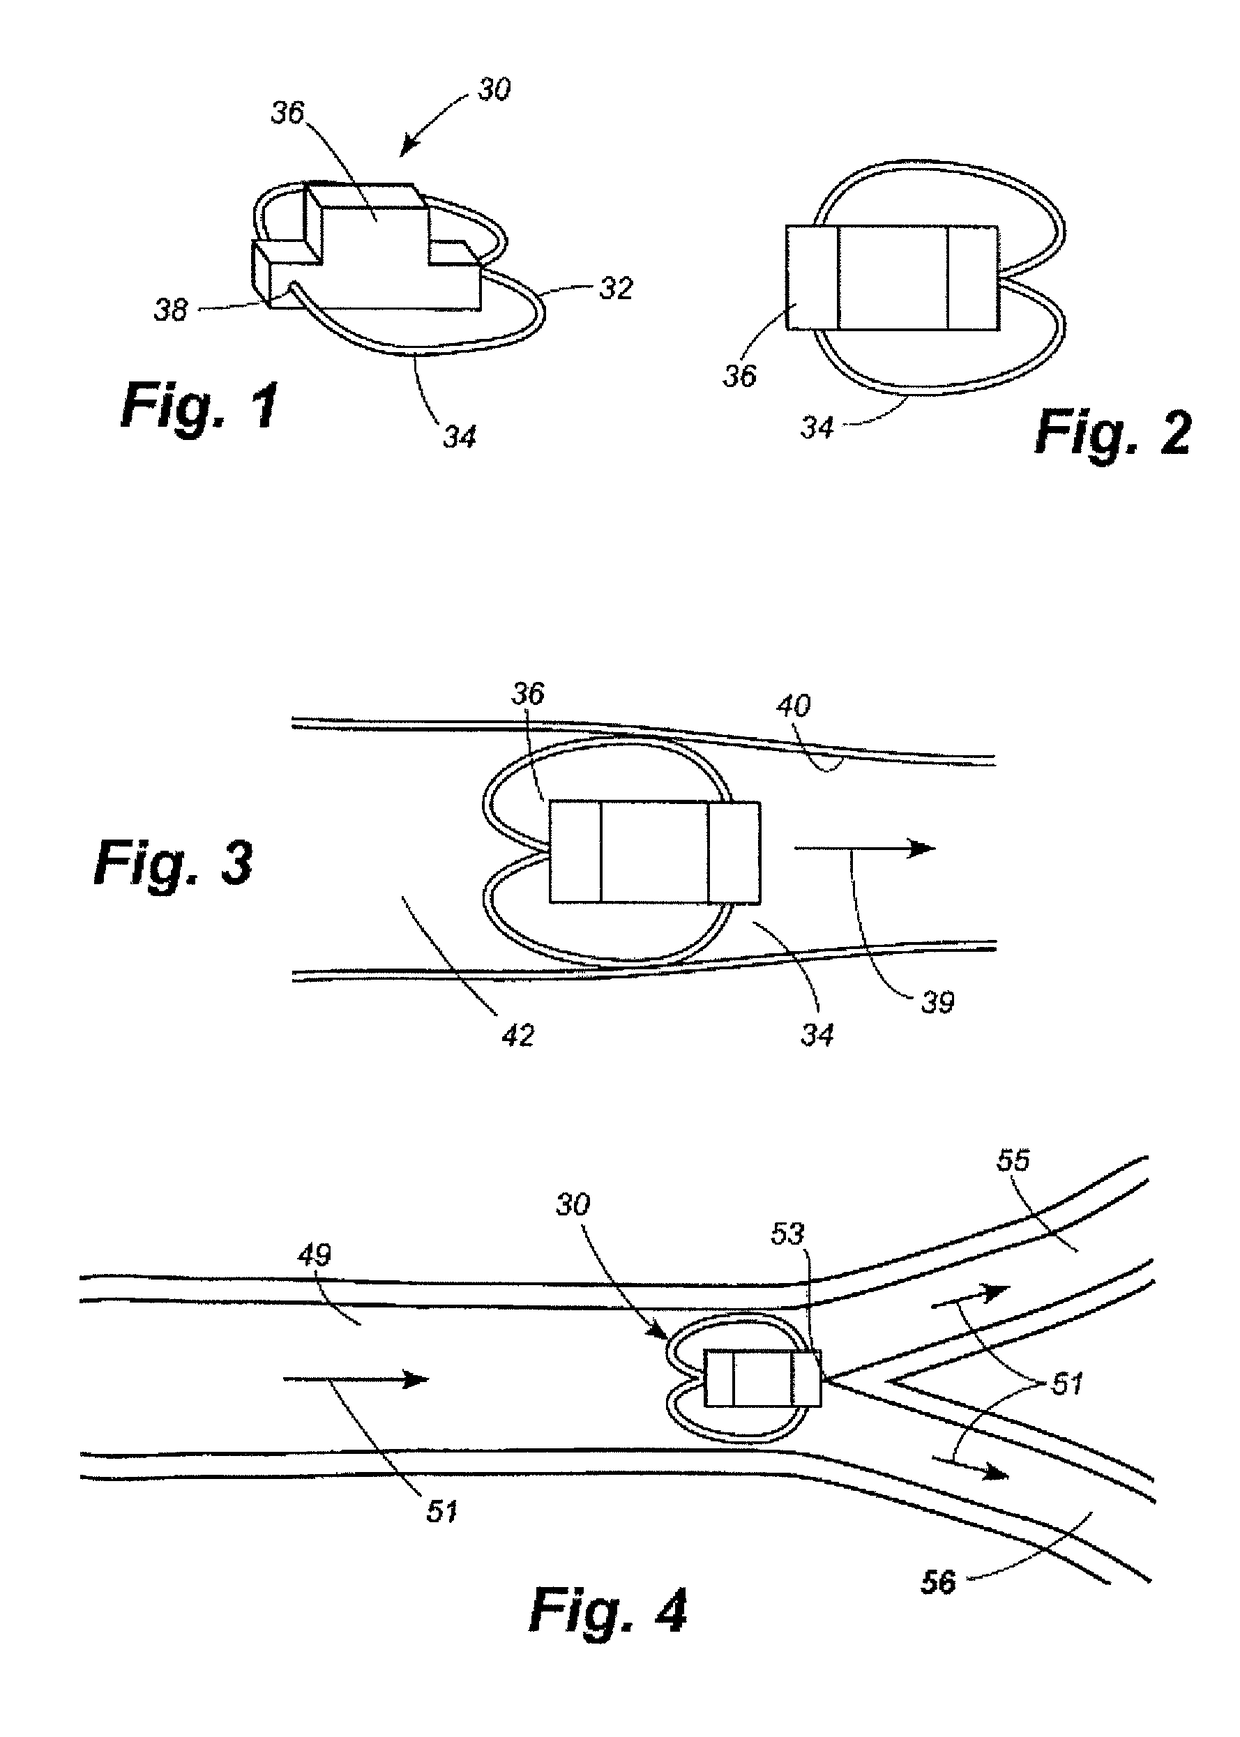 Apparatus and method for sensor deployment and fixation